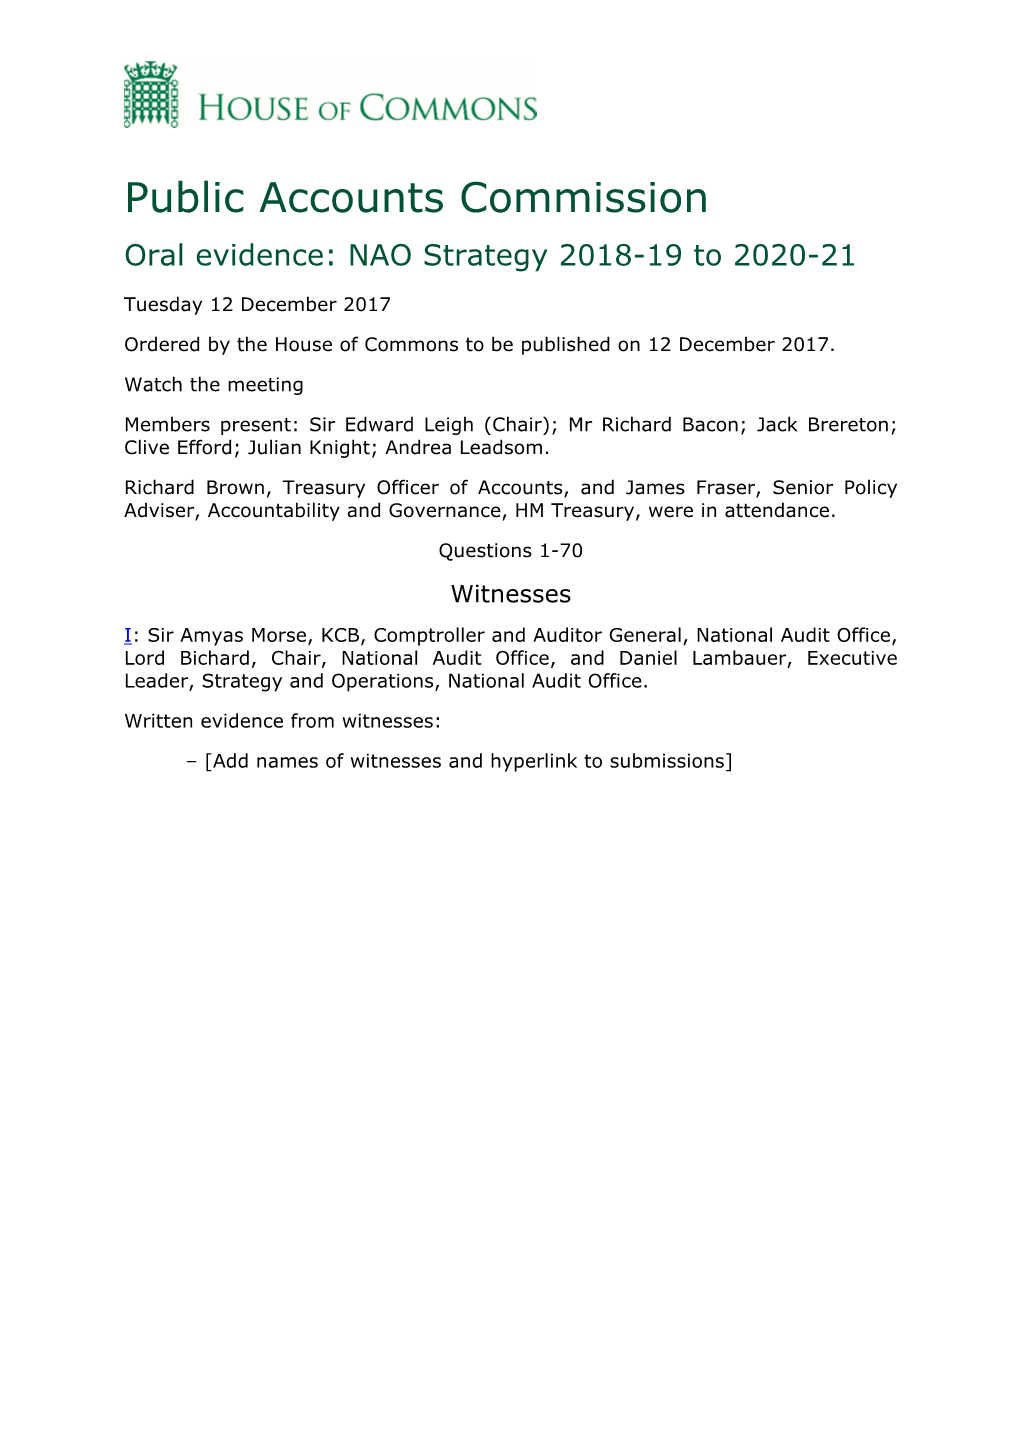 Public Accounts Commission Oral Evidence: NAO Strategy 2018-19 to 2020-21